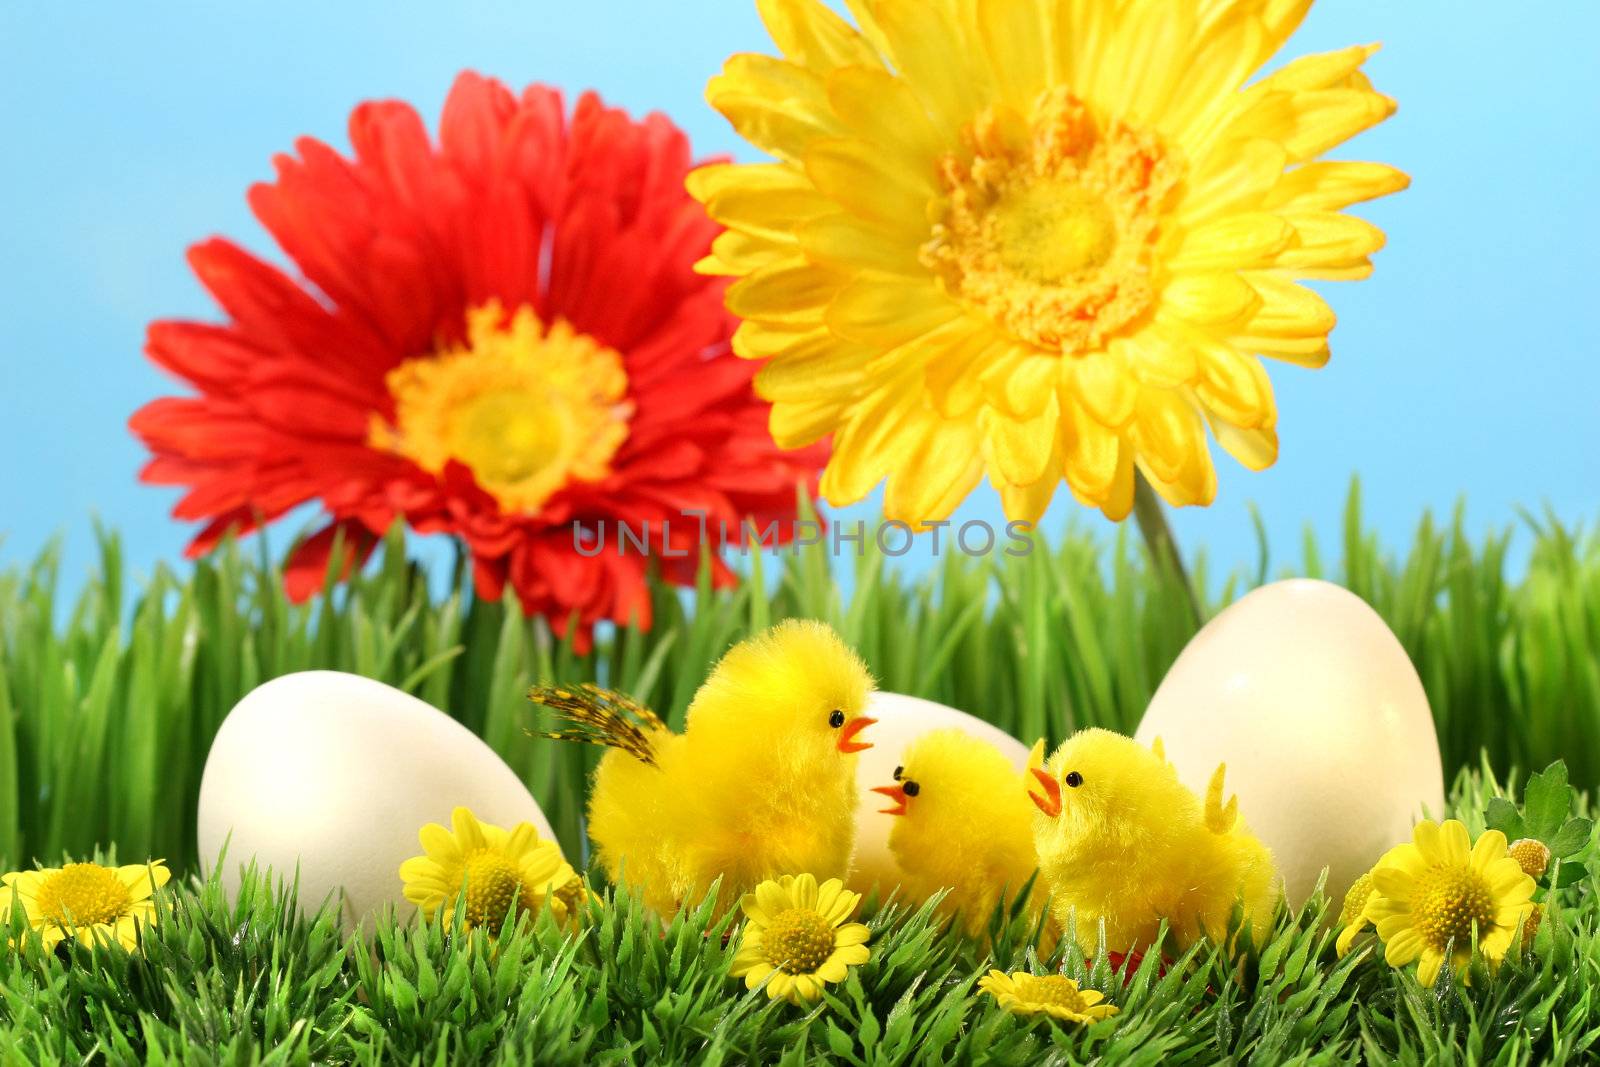 Easter chicks in the grass with flowers against a blue sky